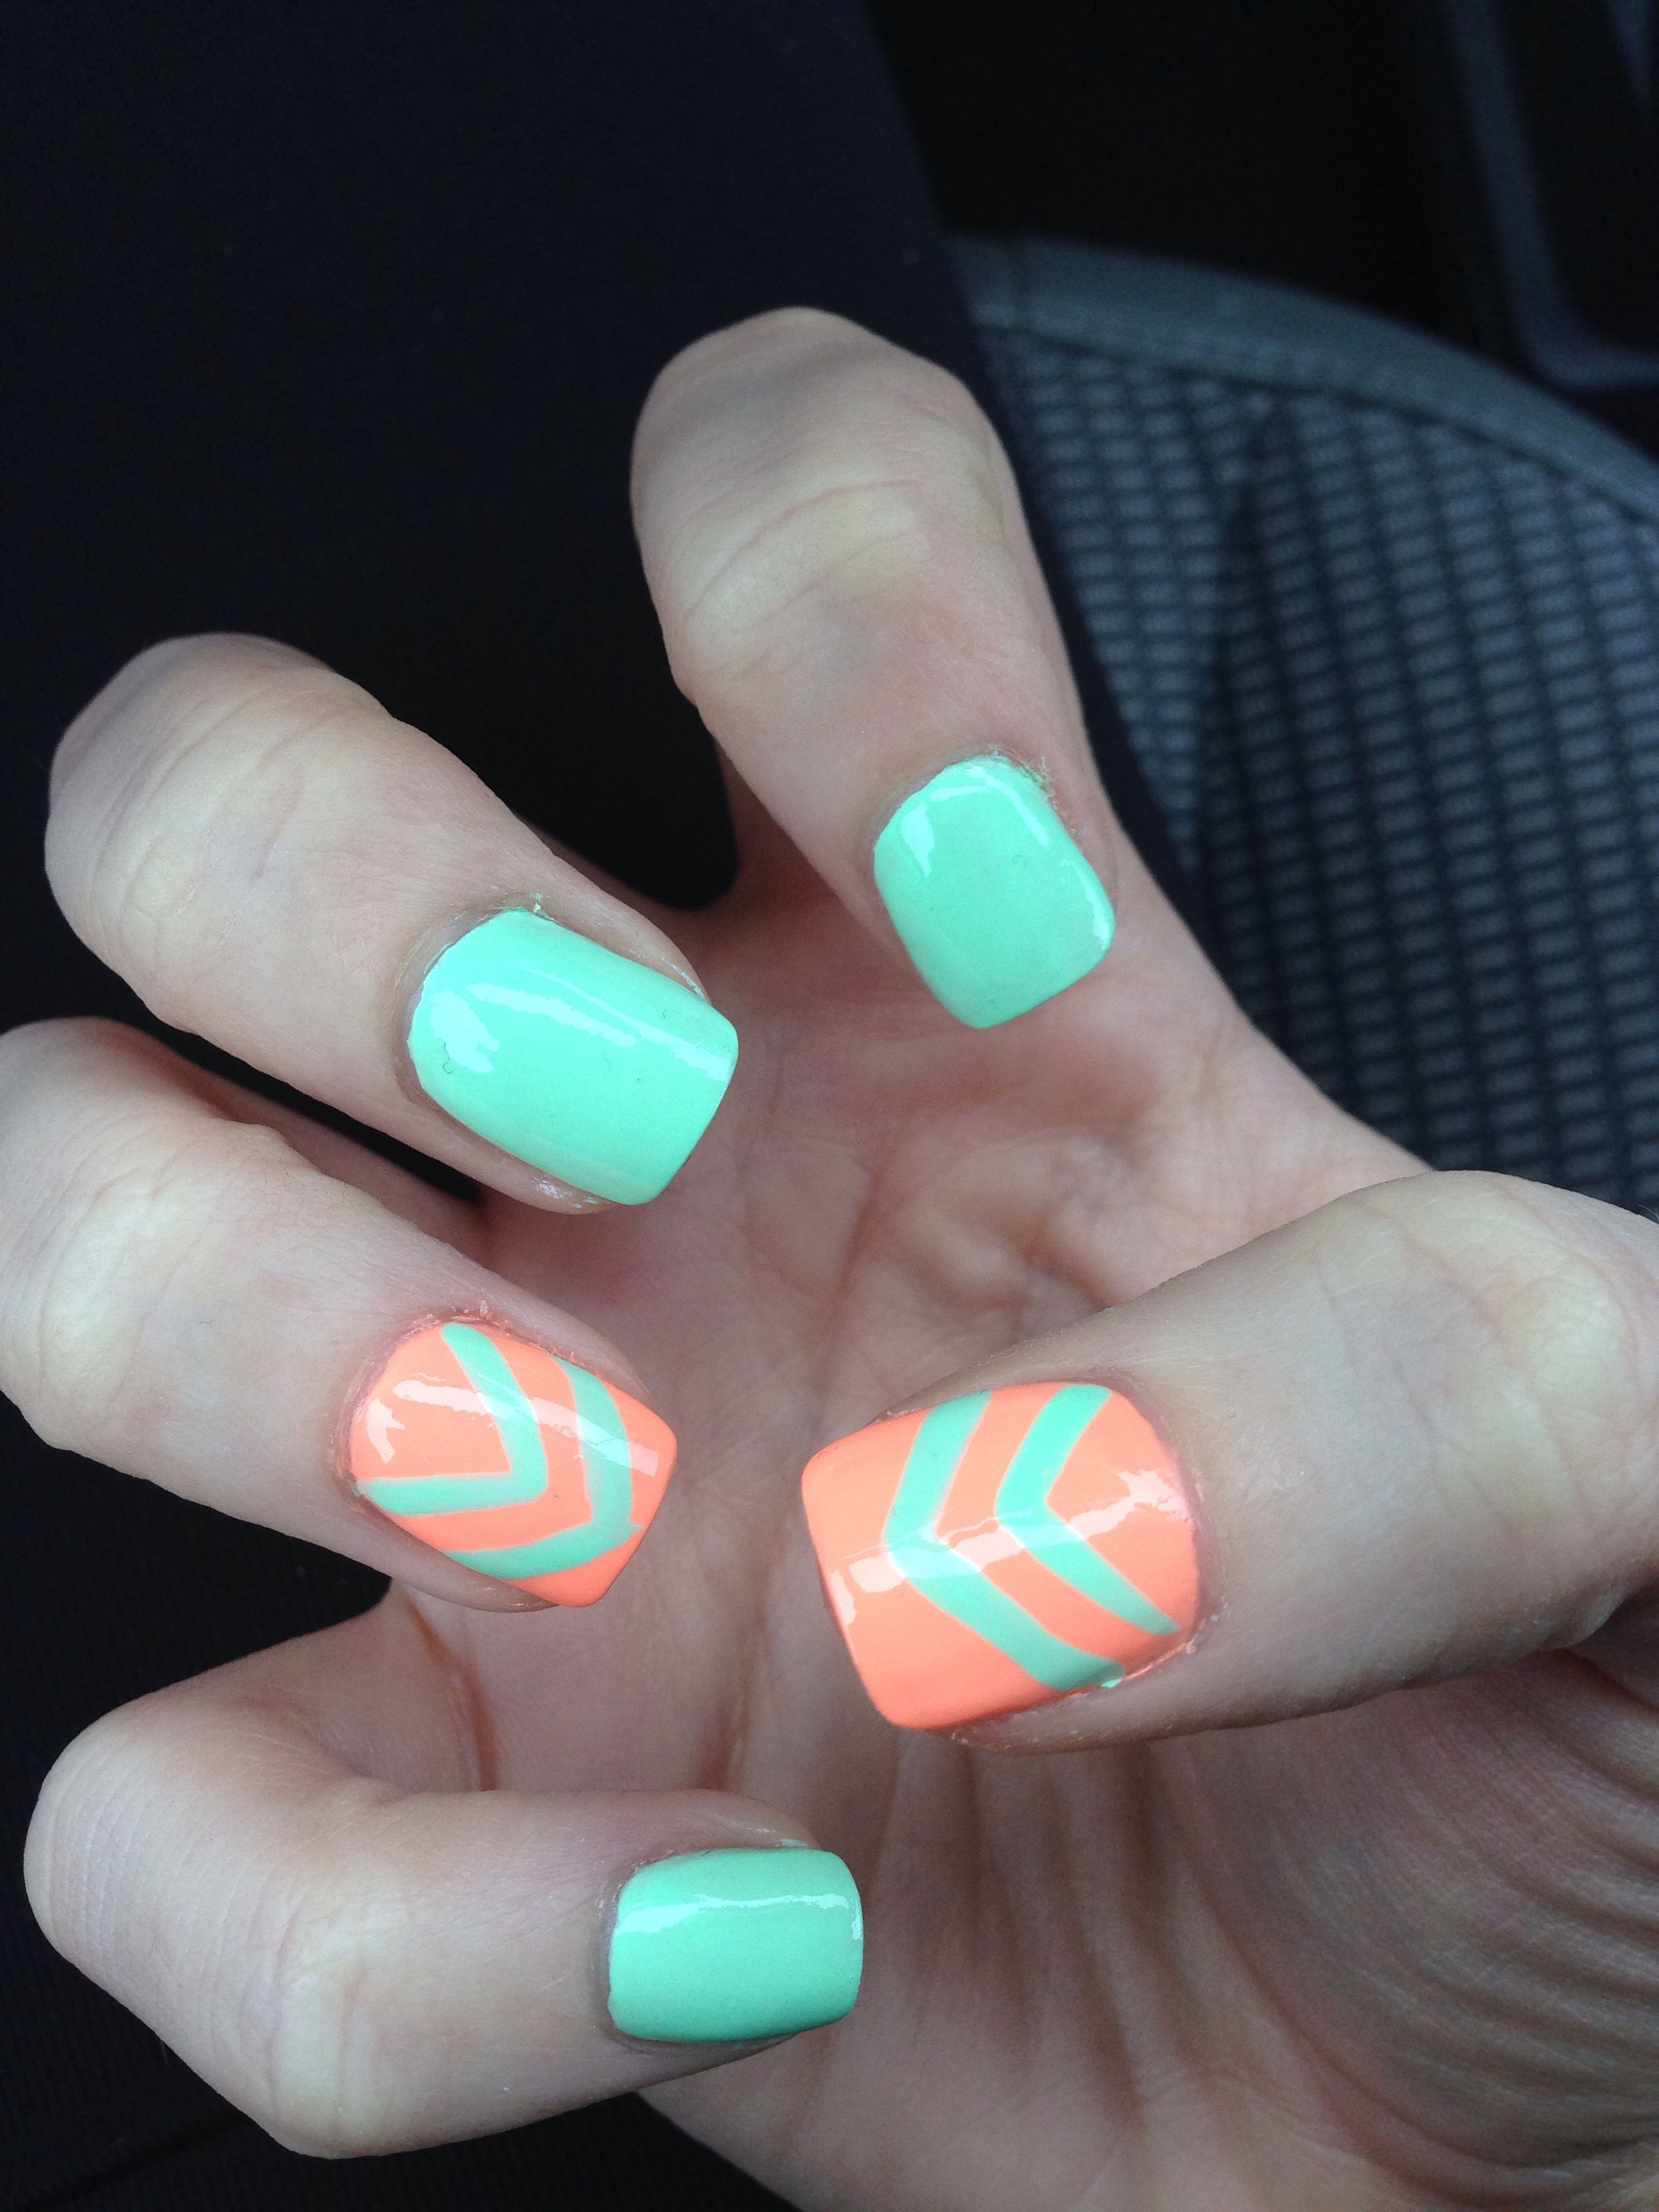 This is a super cute nail design, with a turquoise background, and on the ring finger and the thumb there